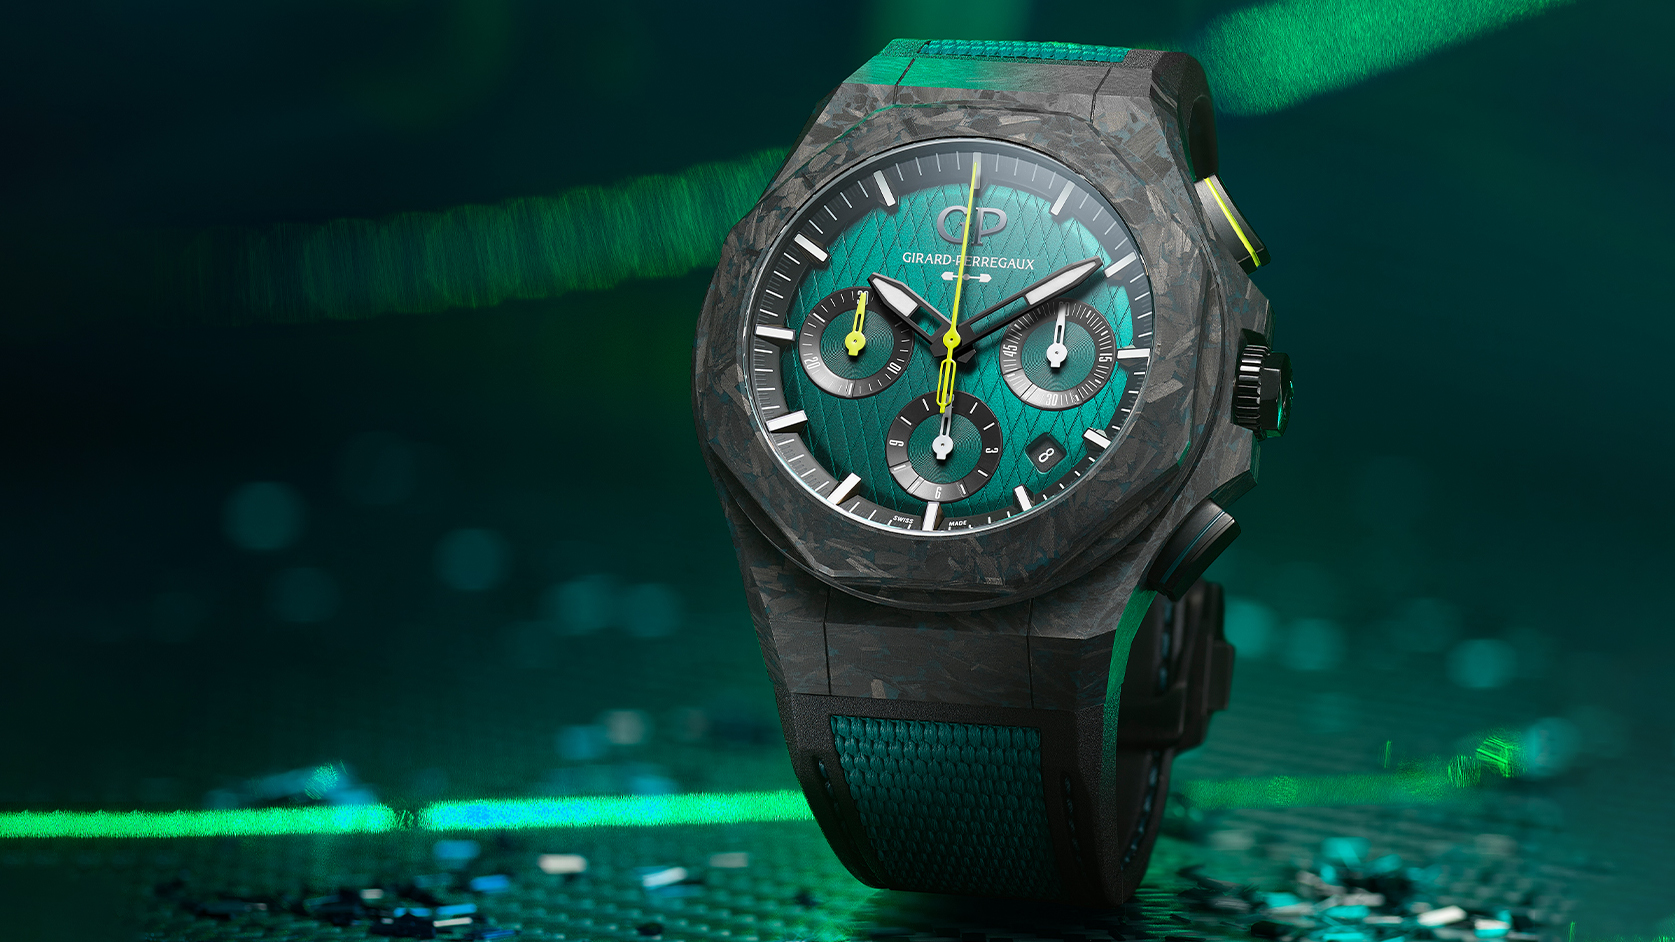 girard-perregaux-and-aston-martin’s-latest-watch-is-made-with-upcycled-carbon-from-f1-racecars